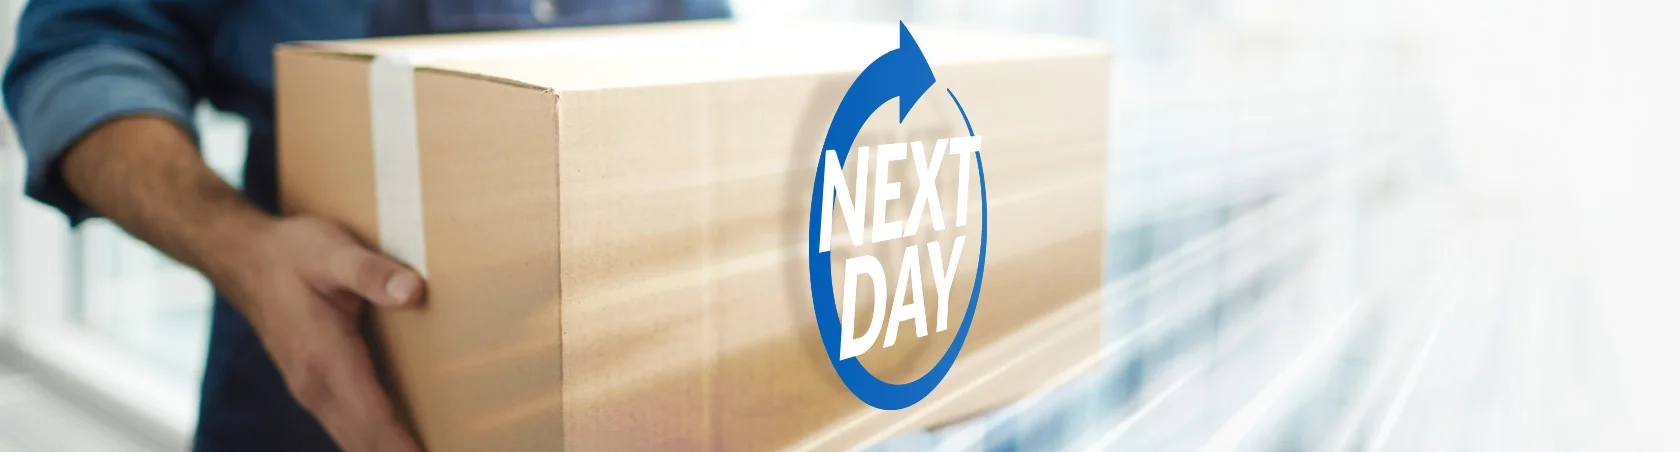 'Next Day' slogan with blue arrow on a box in man's hands with a blurred background